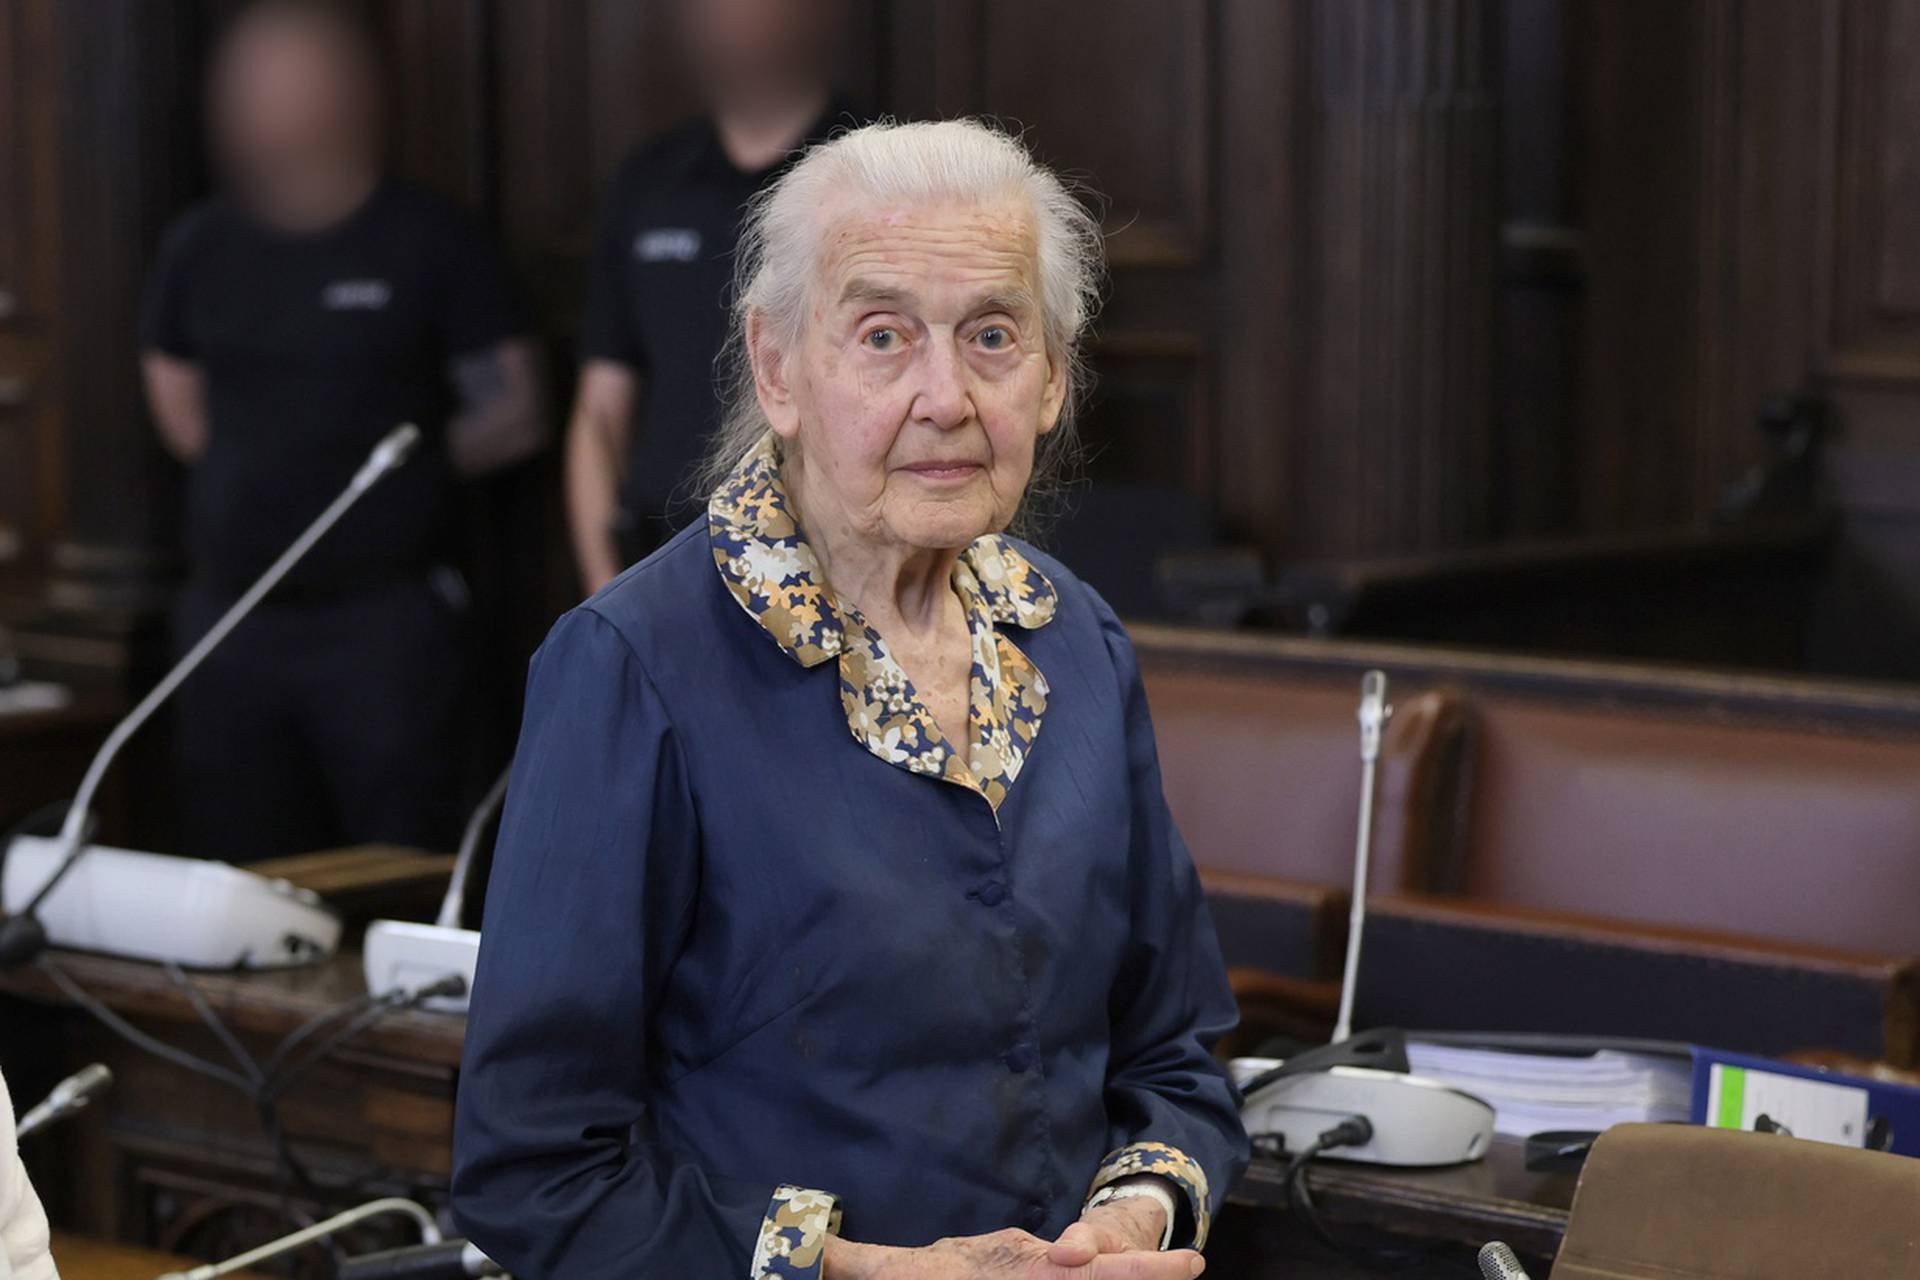 Verdict in the appeal proceedings concerning Holocaust denier Haverbeck